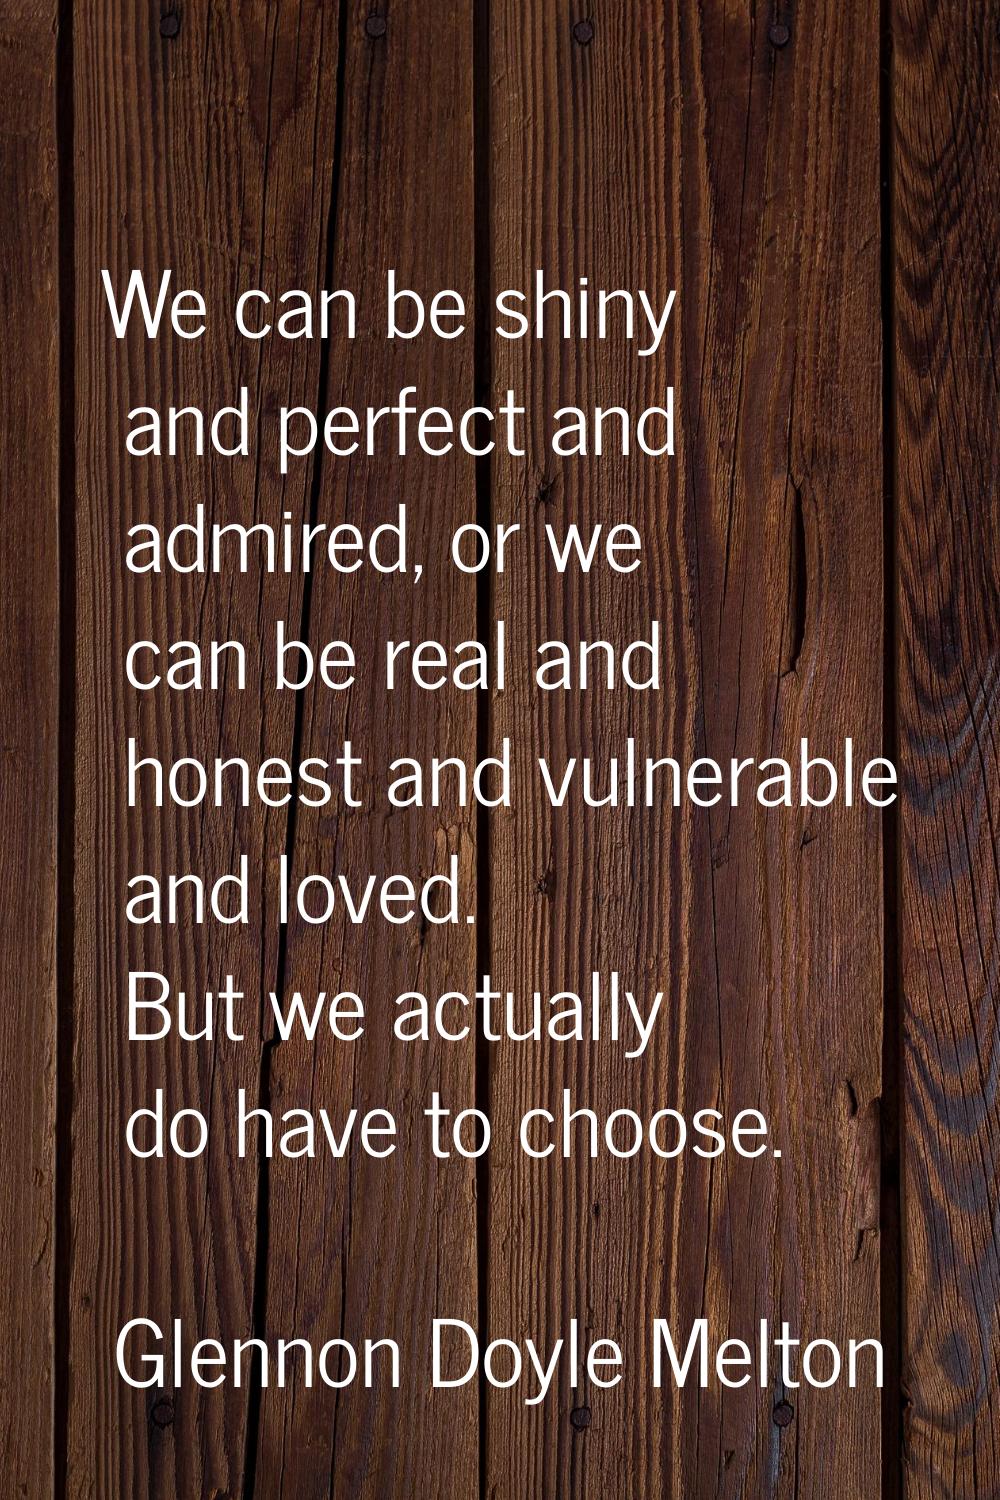 We can be shiny and perfect and admired, or we can be real and honest and vulnerable and loved. But